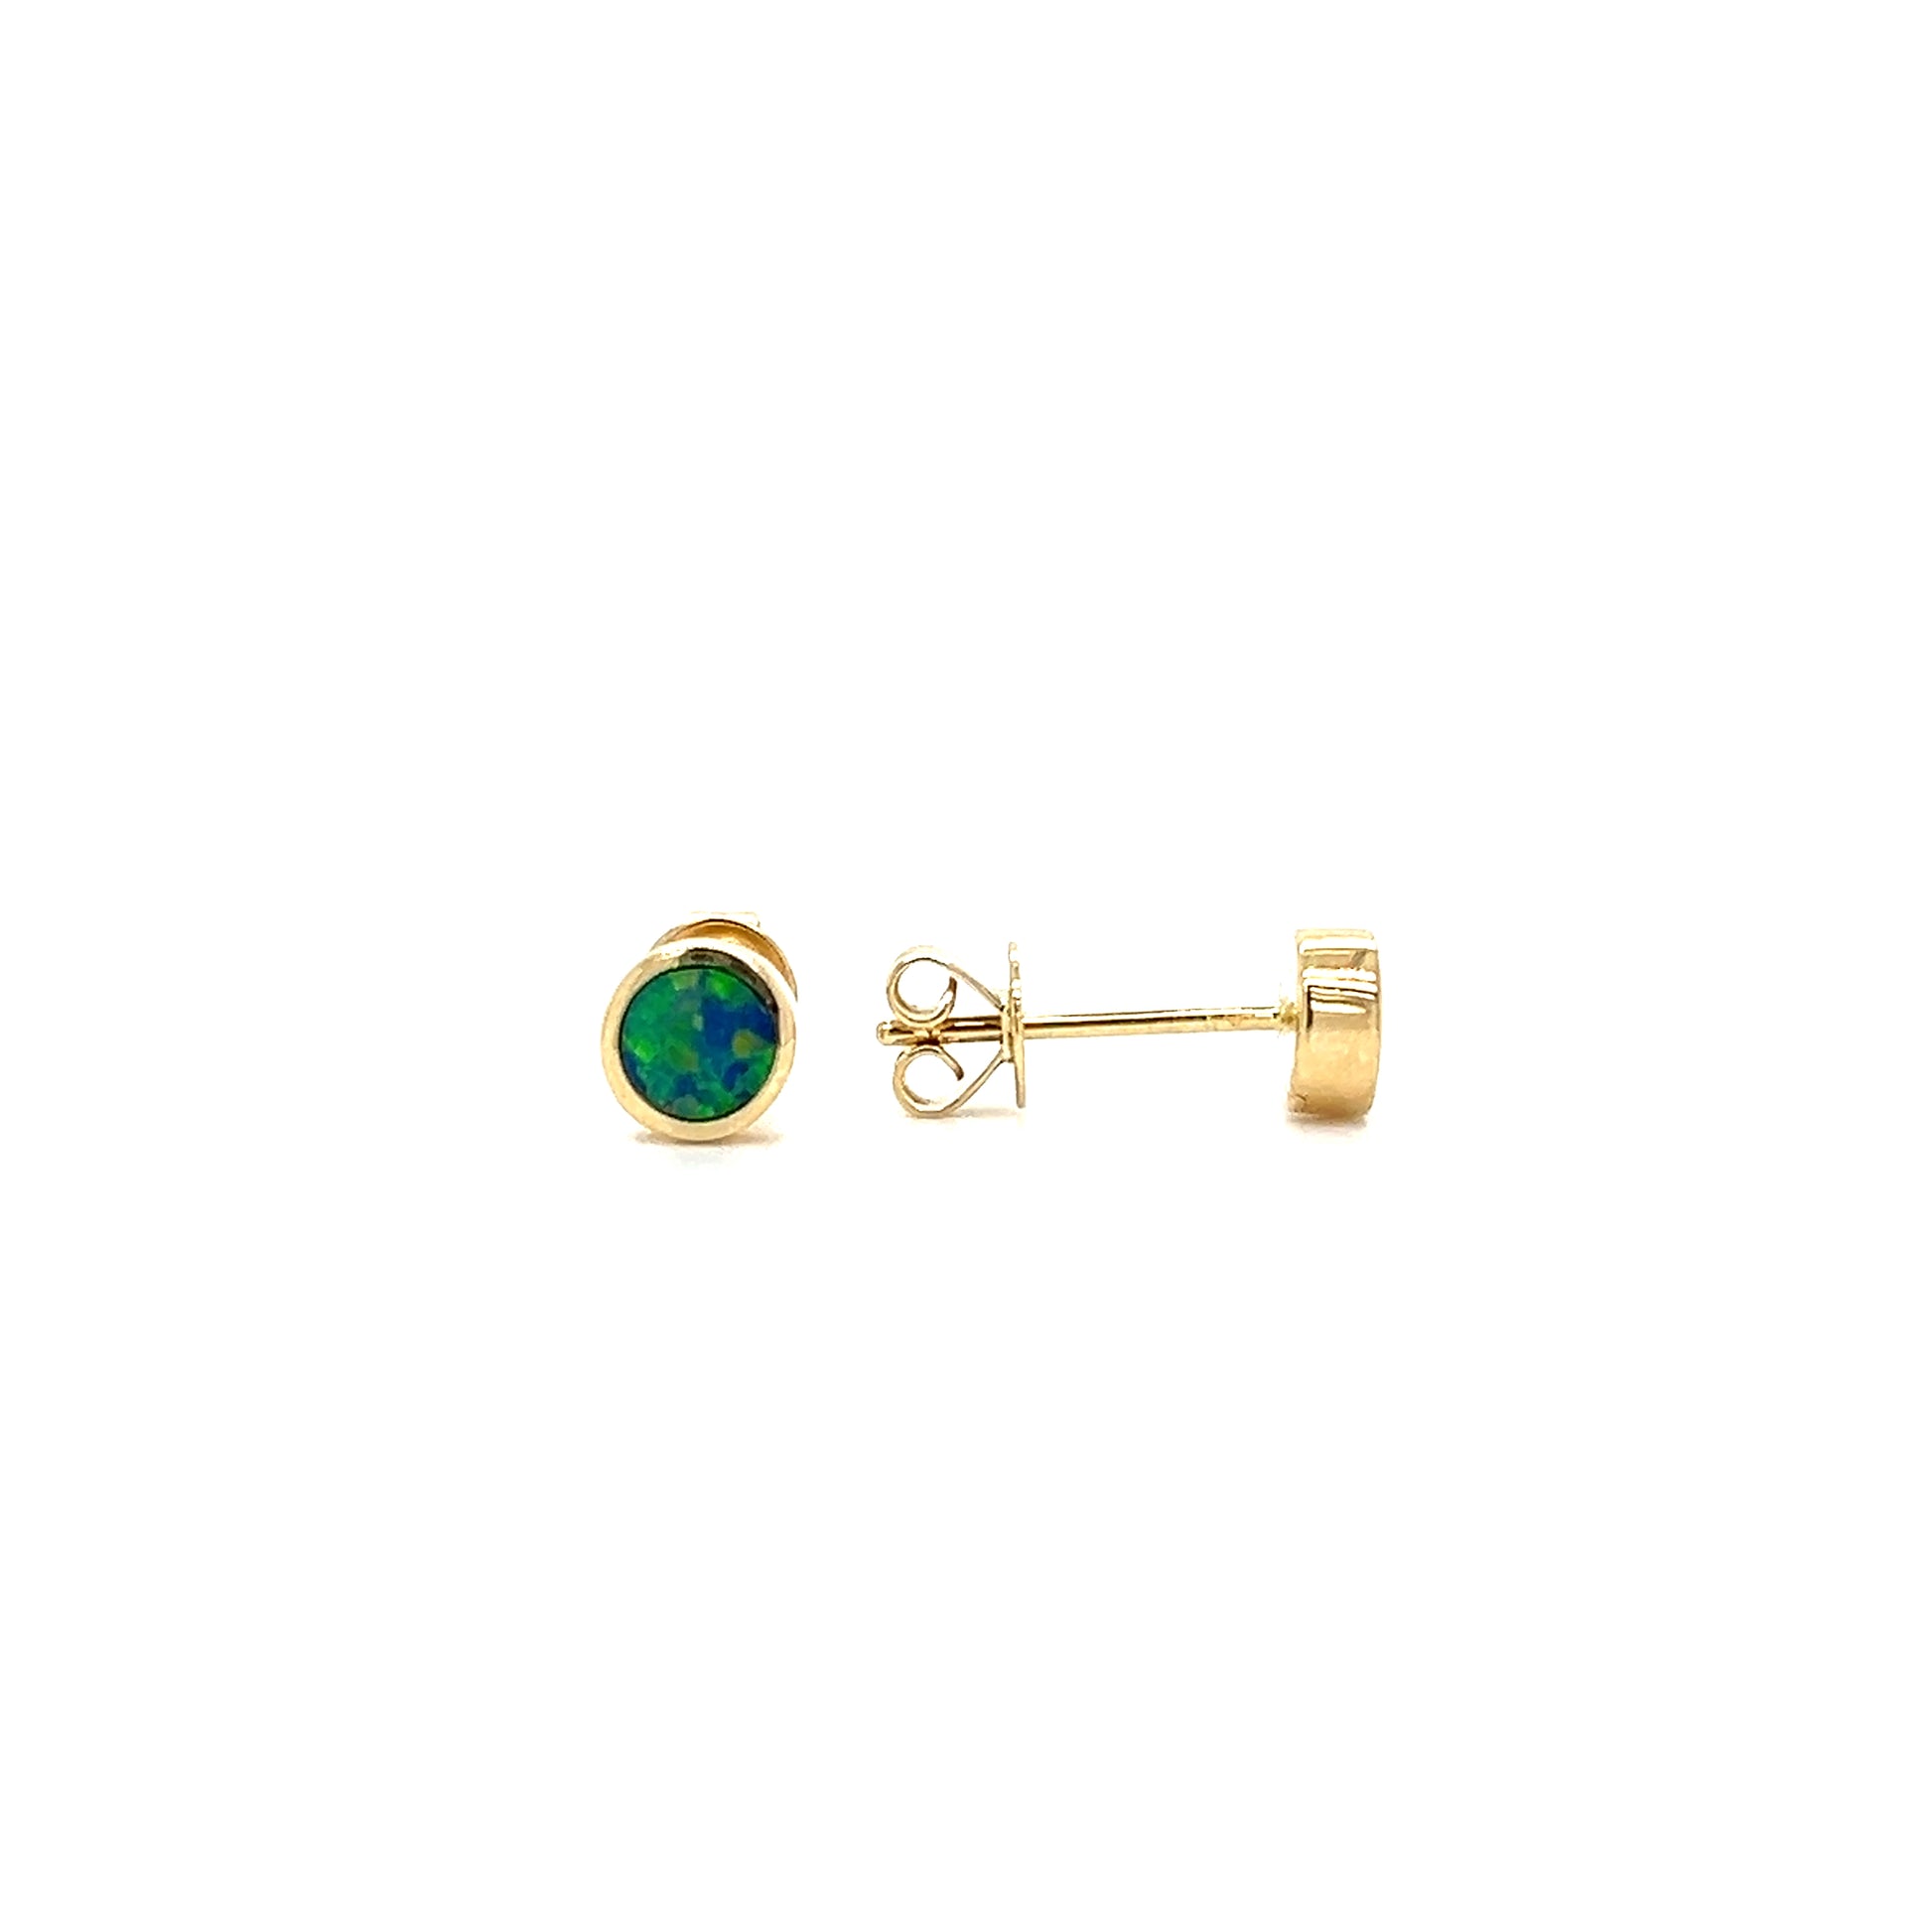 Black Opal Stud Earrings in 14K Yellow Gold Front and Side View